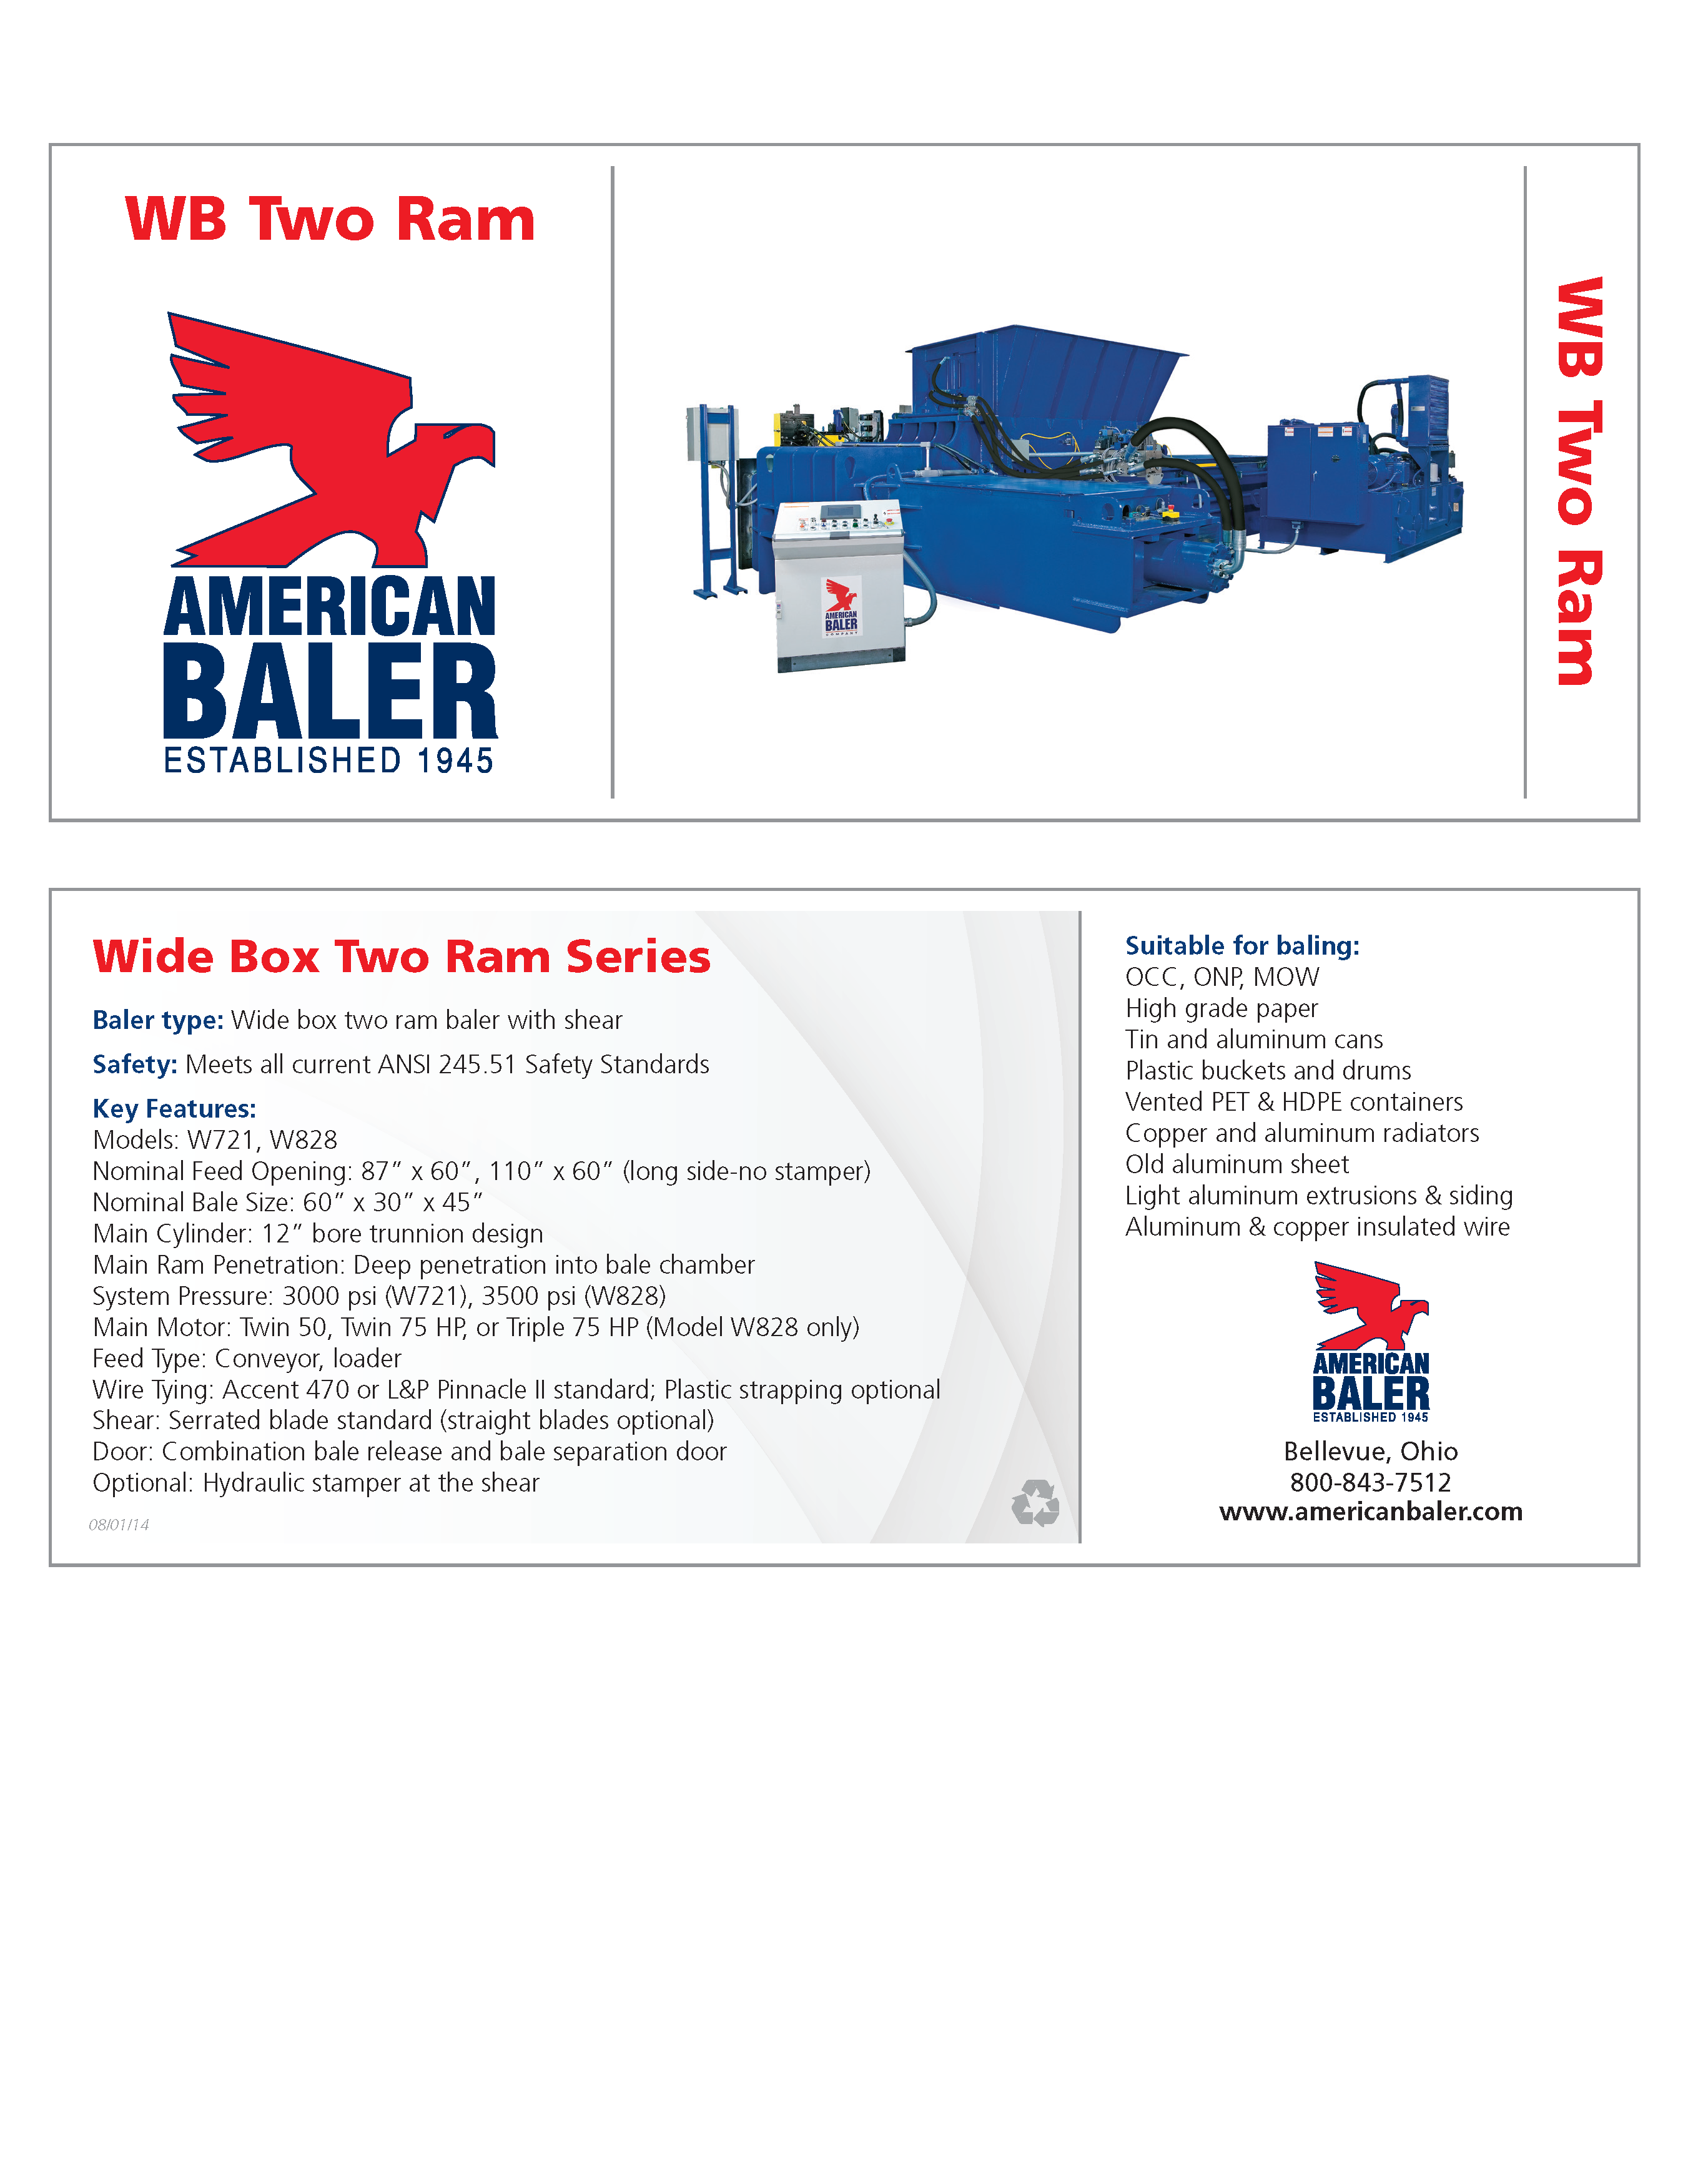 Learn more about the WB Series Balers in the American Baler Brochure.